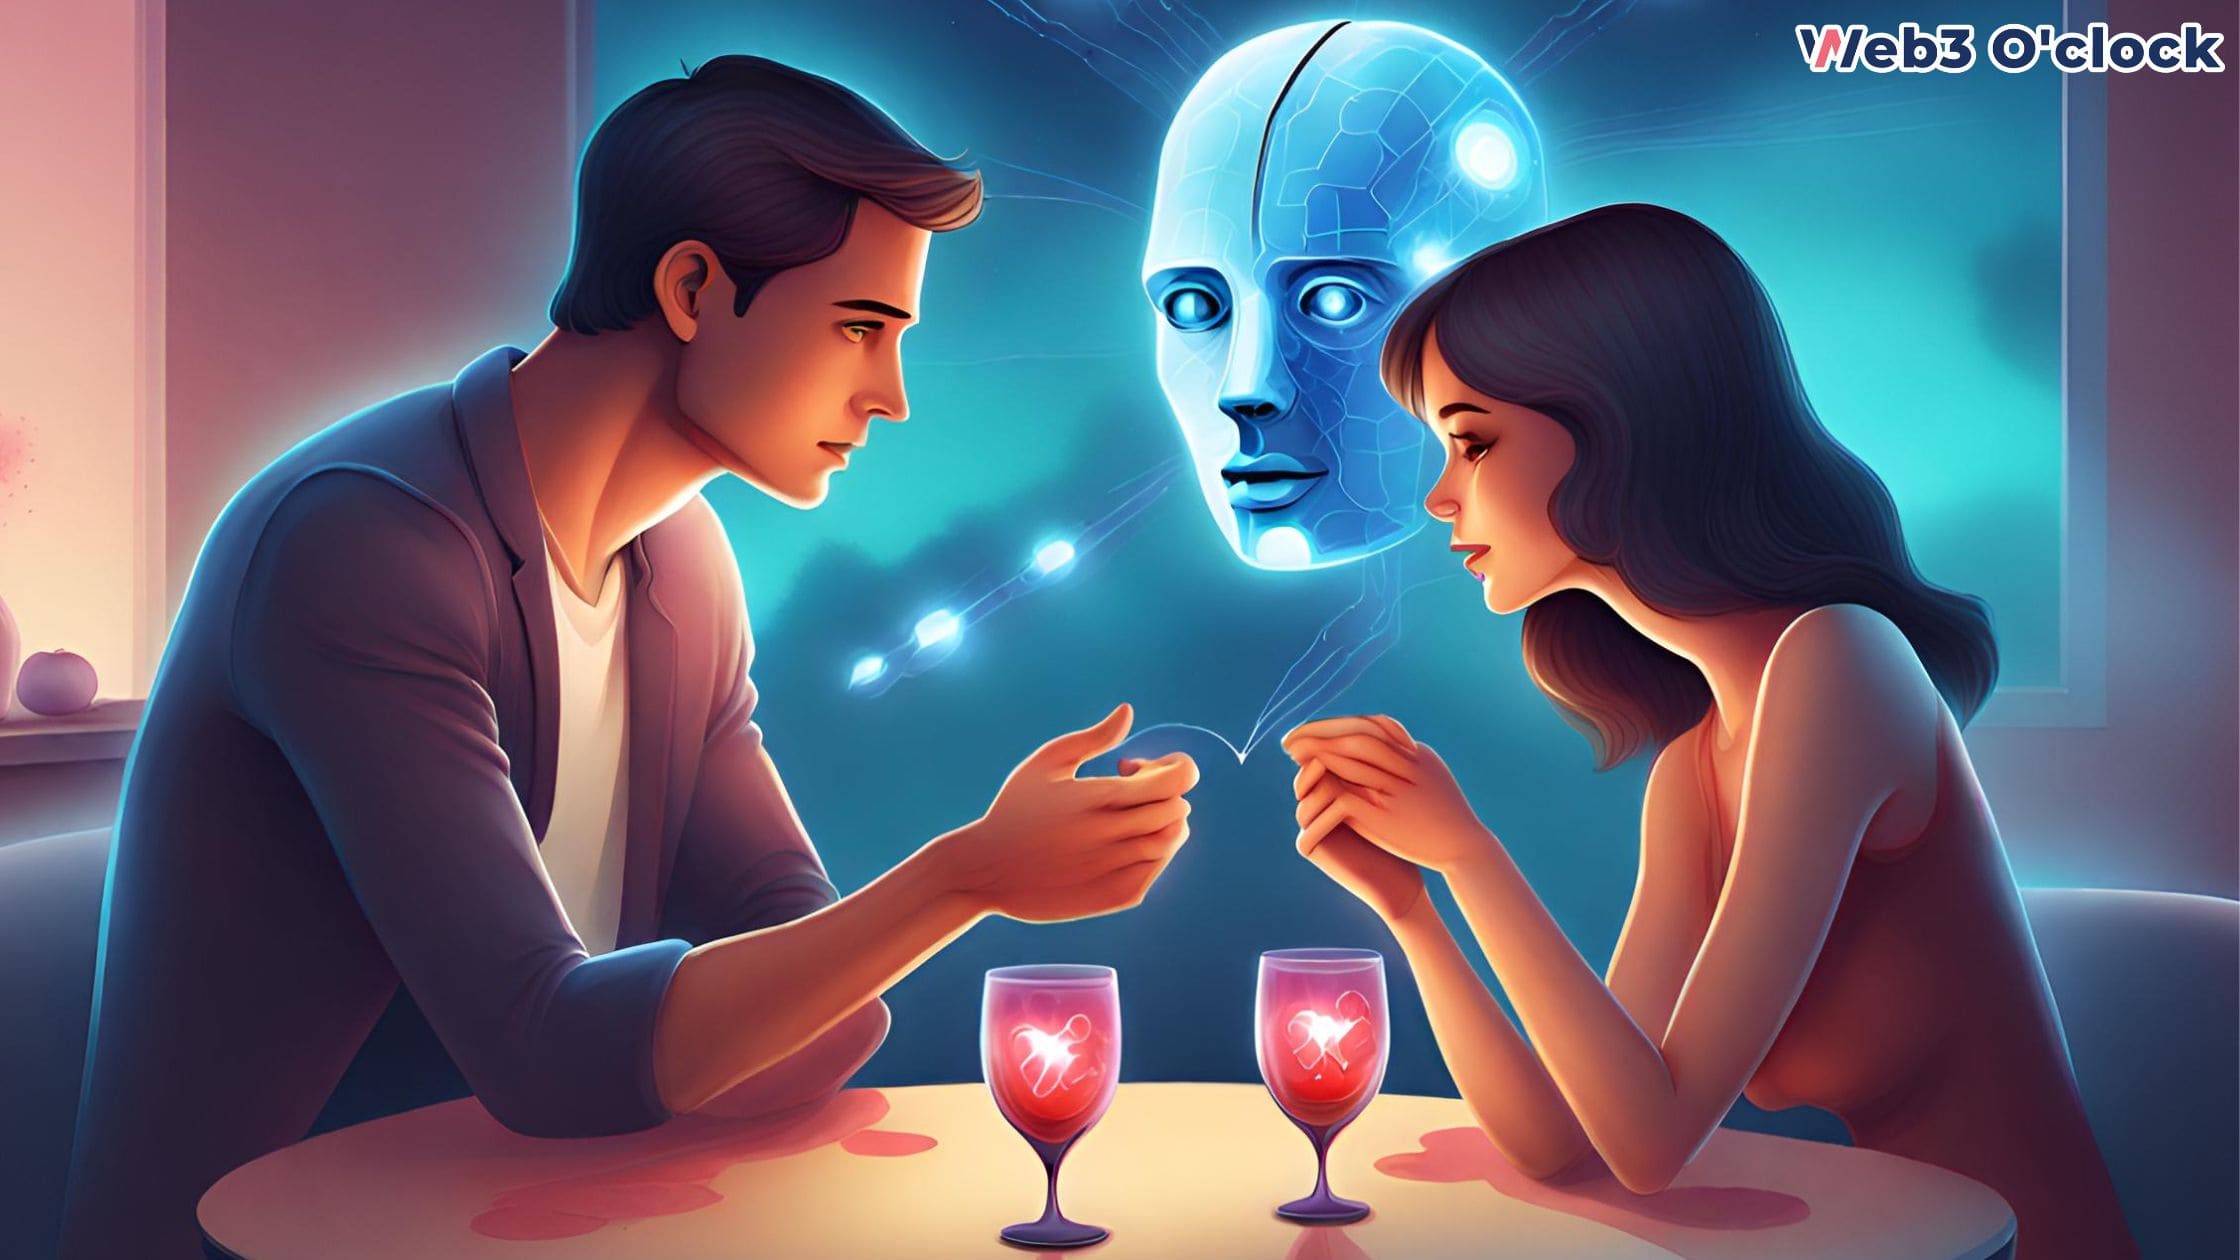 AI Ruining Online Dating by web3 o'clock